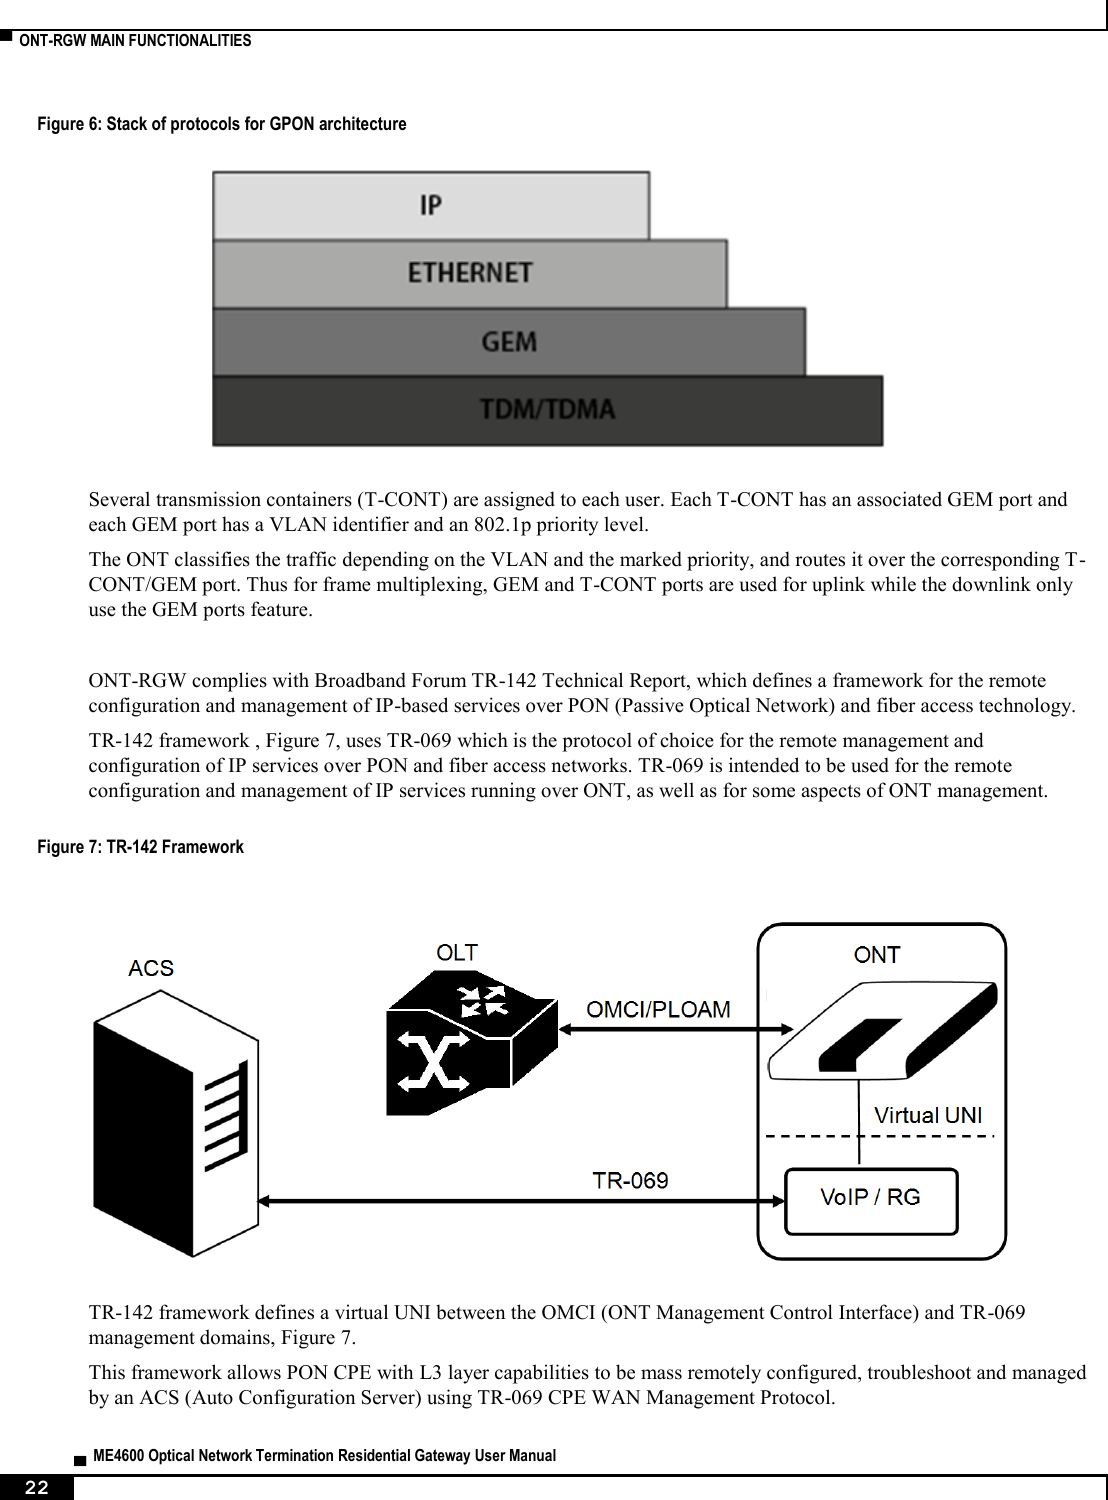  ▀  ONT-RGW MAIN FUNCTIONALITIES   ▄  ME4600 Optical Network Termination Residential Gateway User Manual 22    Figure 6: Stack of protocols for GPON architecture   Several transmission containers (T-CONT) are assigned to each user. Each T-CONT has an associated GEM port and each GEM port has a VLAN identifier and an 802.1p priority level.  The ONT classifies the traffic depending on the VLAN and the marked priority, and routes it over the corresponding T-CONT/GEM port. Thus for frame multiplexing, GEM and T-CONT ports are used for uplink while the downlink only use the GEM ports feature.  ONT-RGW complies with Broadband Forum TR-142 Technical Report, which defines a framework for the remote configuration and management of IP-based services over PON (Passive Optical Network) and fiber access technology. TR-142 framework , Figure 7, uses TR-069 which is the protocol of choice for the remote management and configuration of IP services over PON and fiber access networks. TR-069 is intended to be used for the remote configuration and management of IP services running over ONT, as well as for some aspects of ONT management. Figure 7: TR-142 Framework    TR-142 framework defines a virtual UNI between the OMCI (ONT Management Control Interface) and TR-069 management domains, Figure 7. This framework allows PON CPE with L3 layer capabilities to be mass remotely configured, troubleshoot and managed by an ACS (Auto Configuration Server) using TR-069 CPE WAN Management Protocol. 